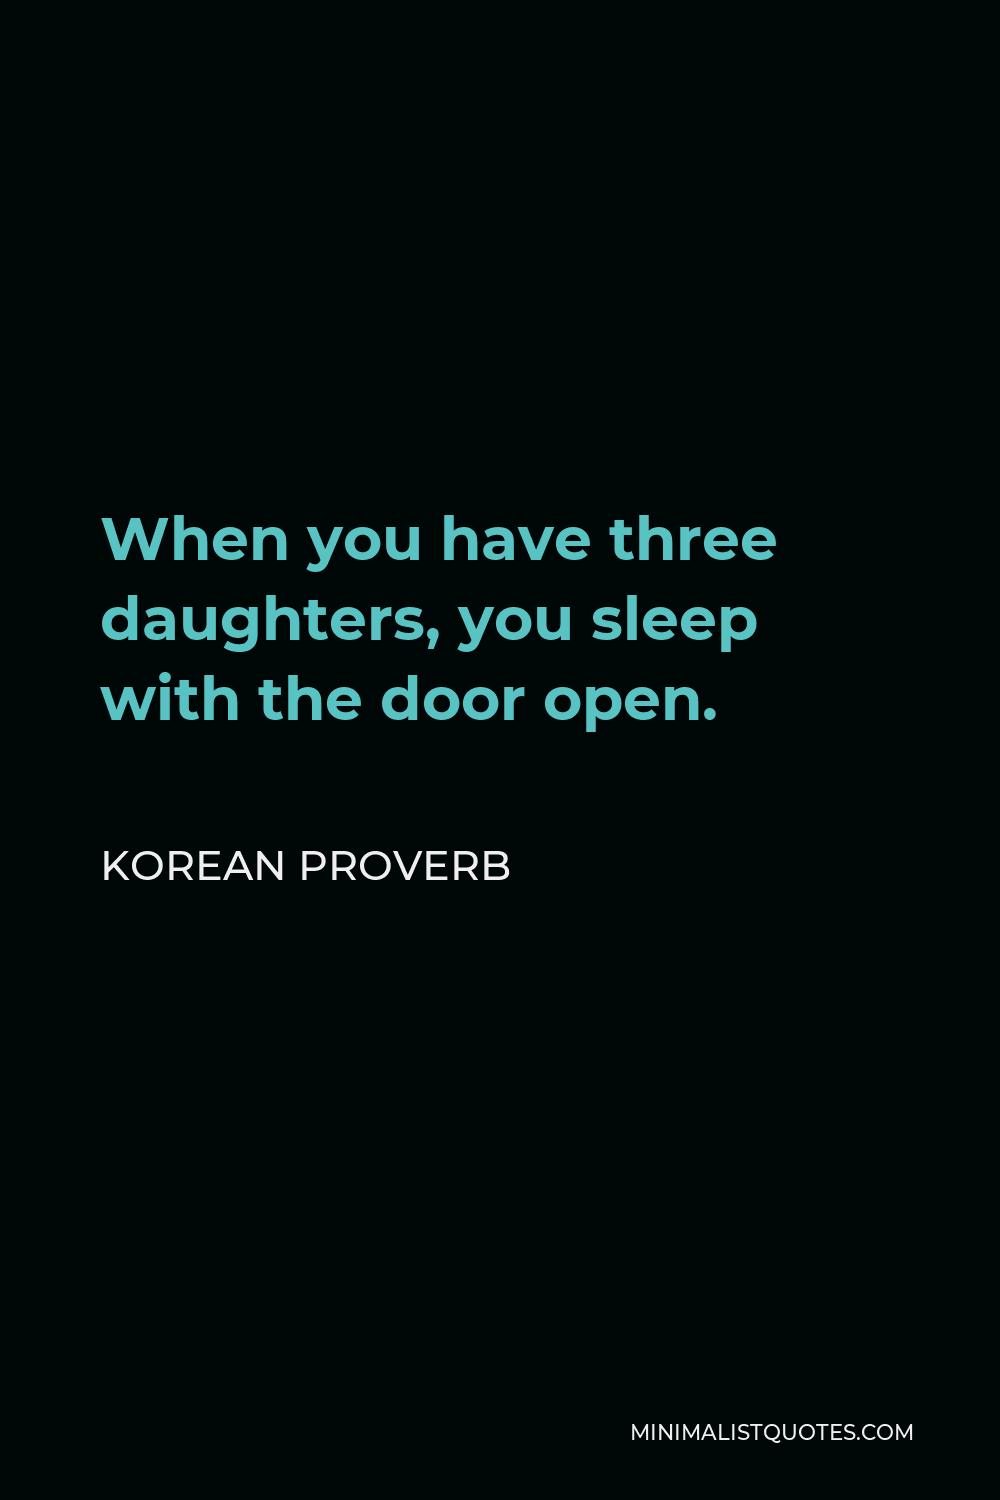 Korean Proverb Quote - When you have three daughters, you sleep with the door open.